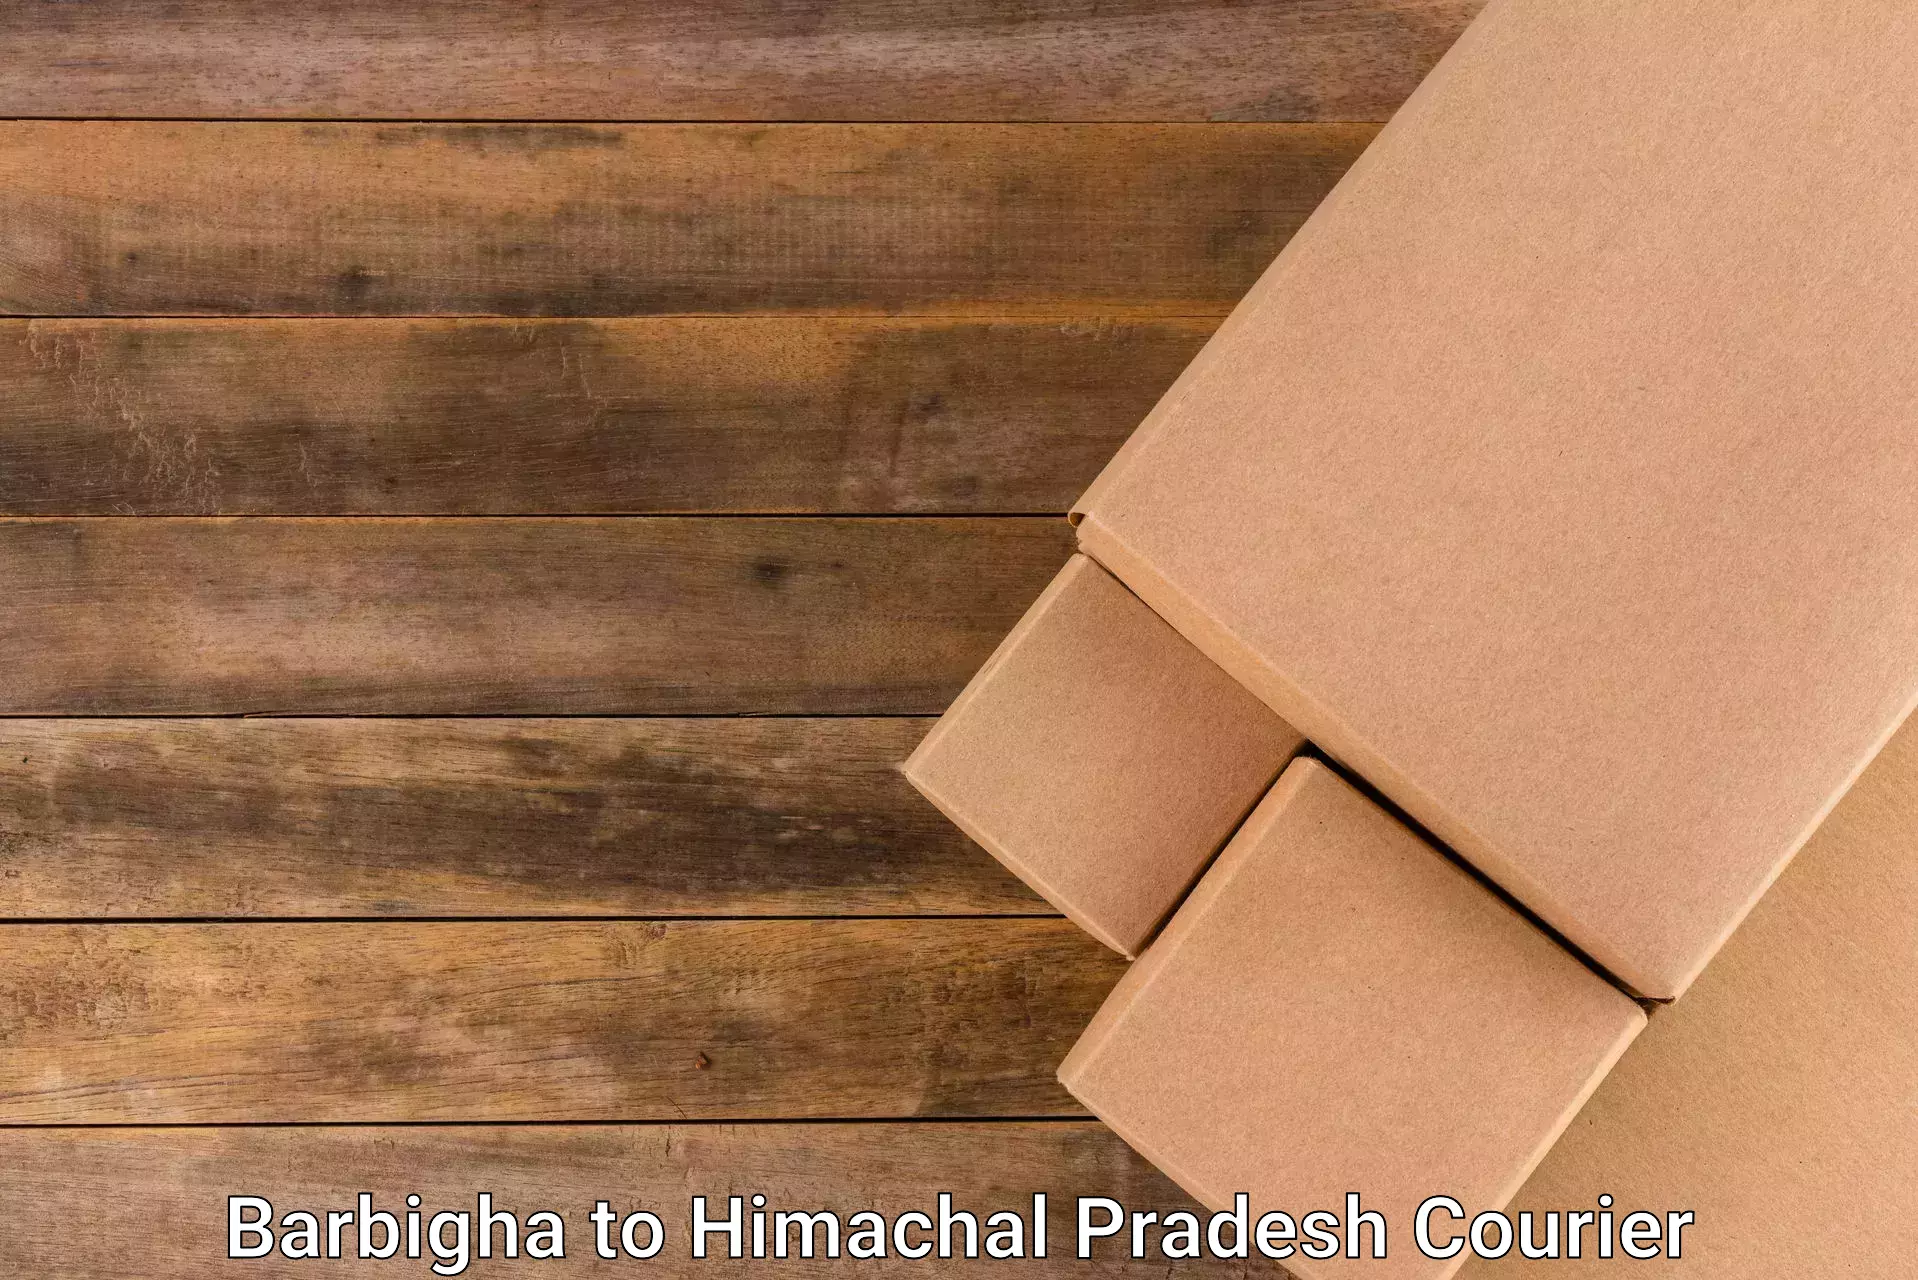 Rural area delivery in Barbigha to Himachal Pradesh